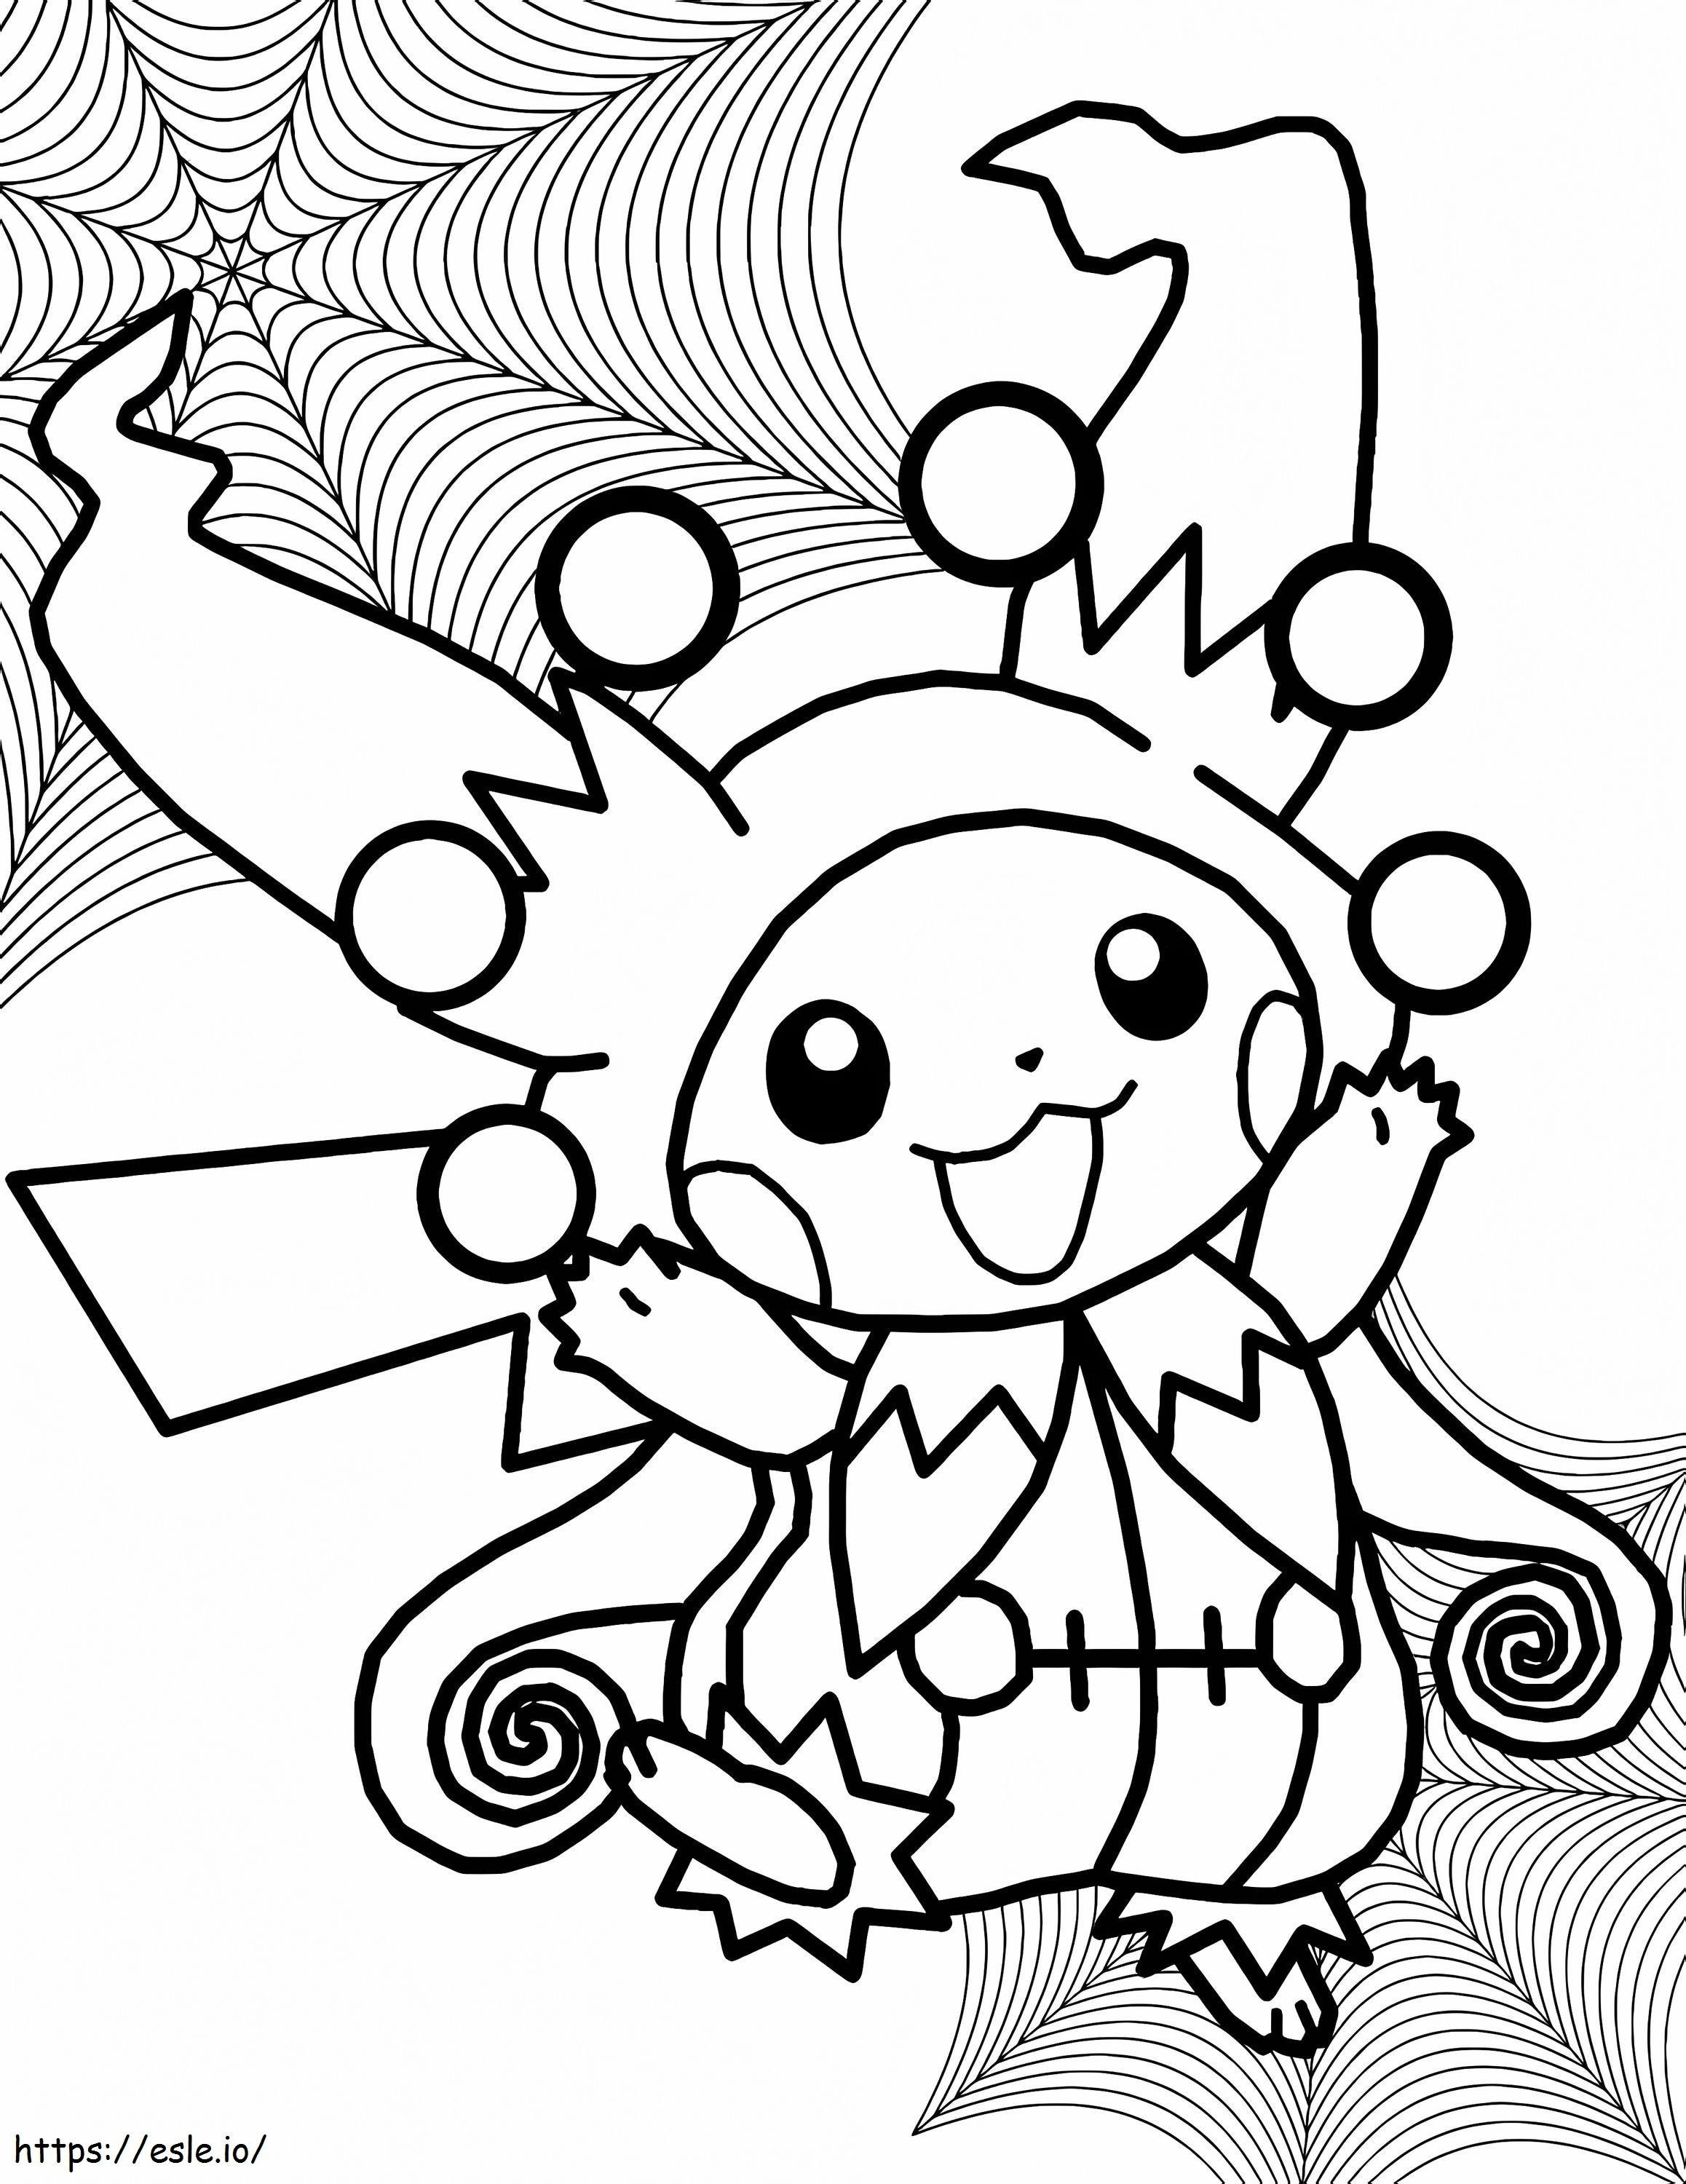 Pikachu And Halloween Costume coloring page